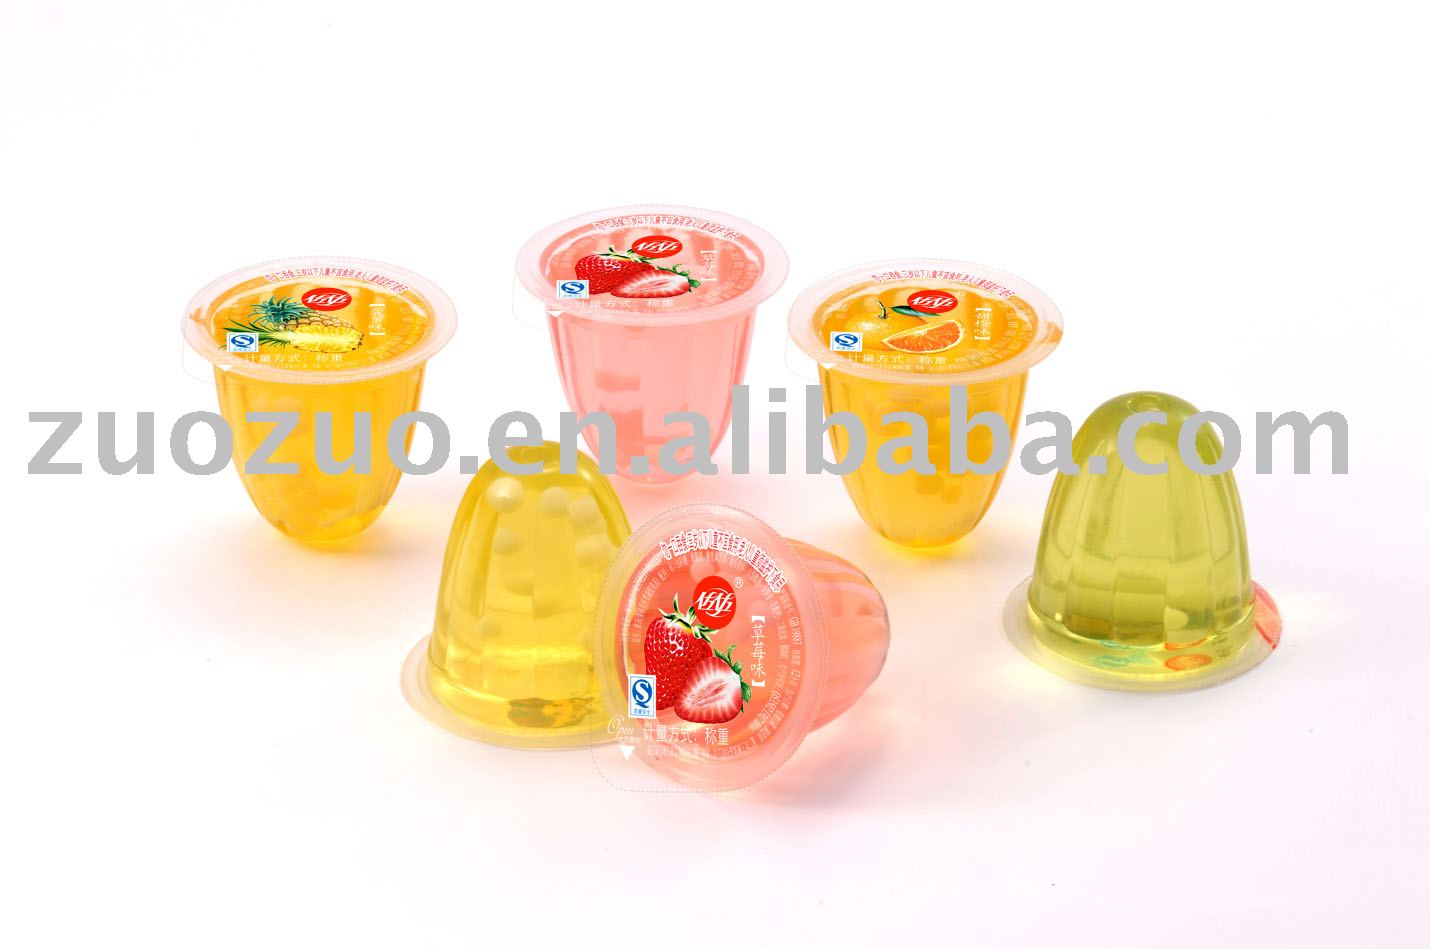 Cup Jelly - 30g,China ZUOZUO price supplier - 21food